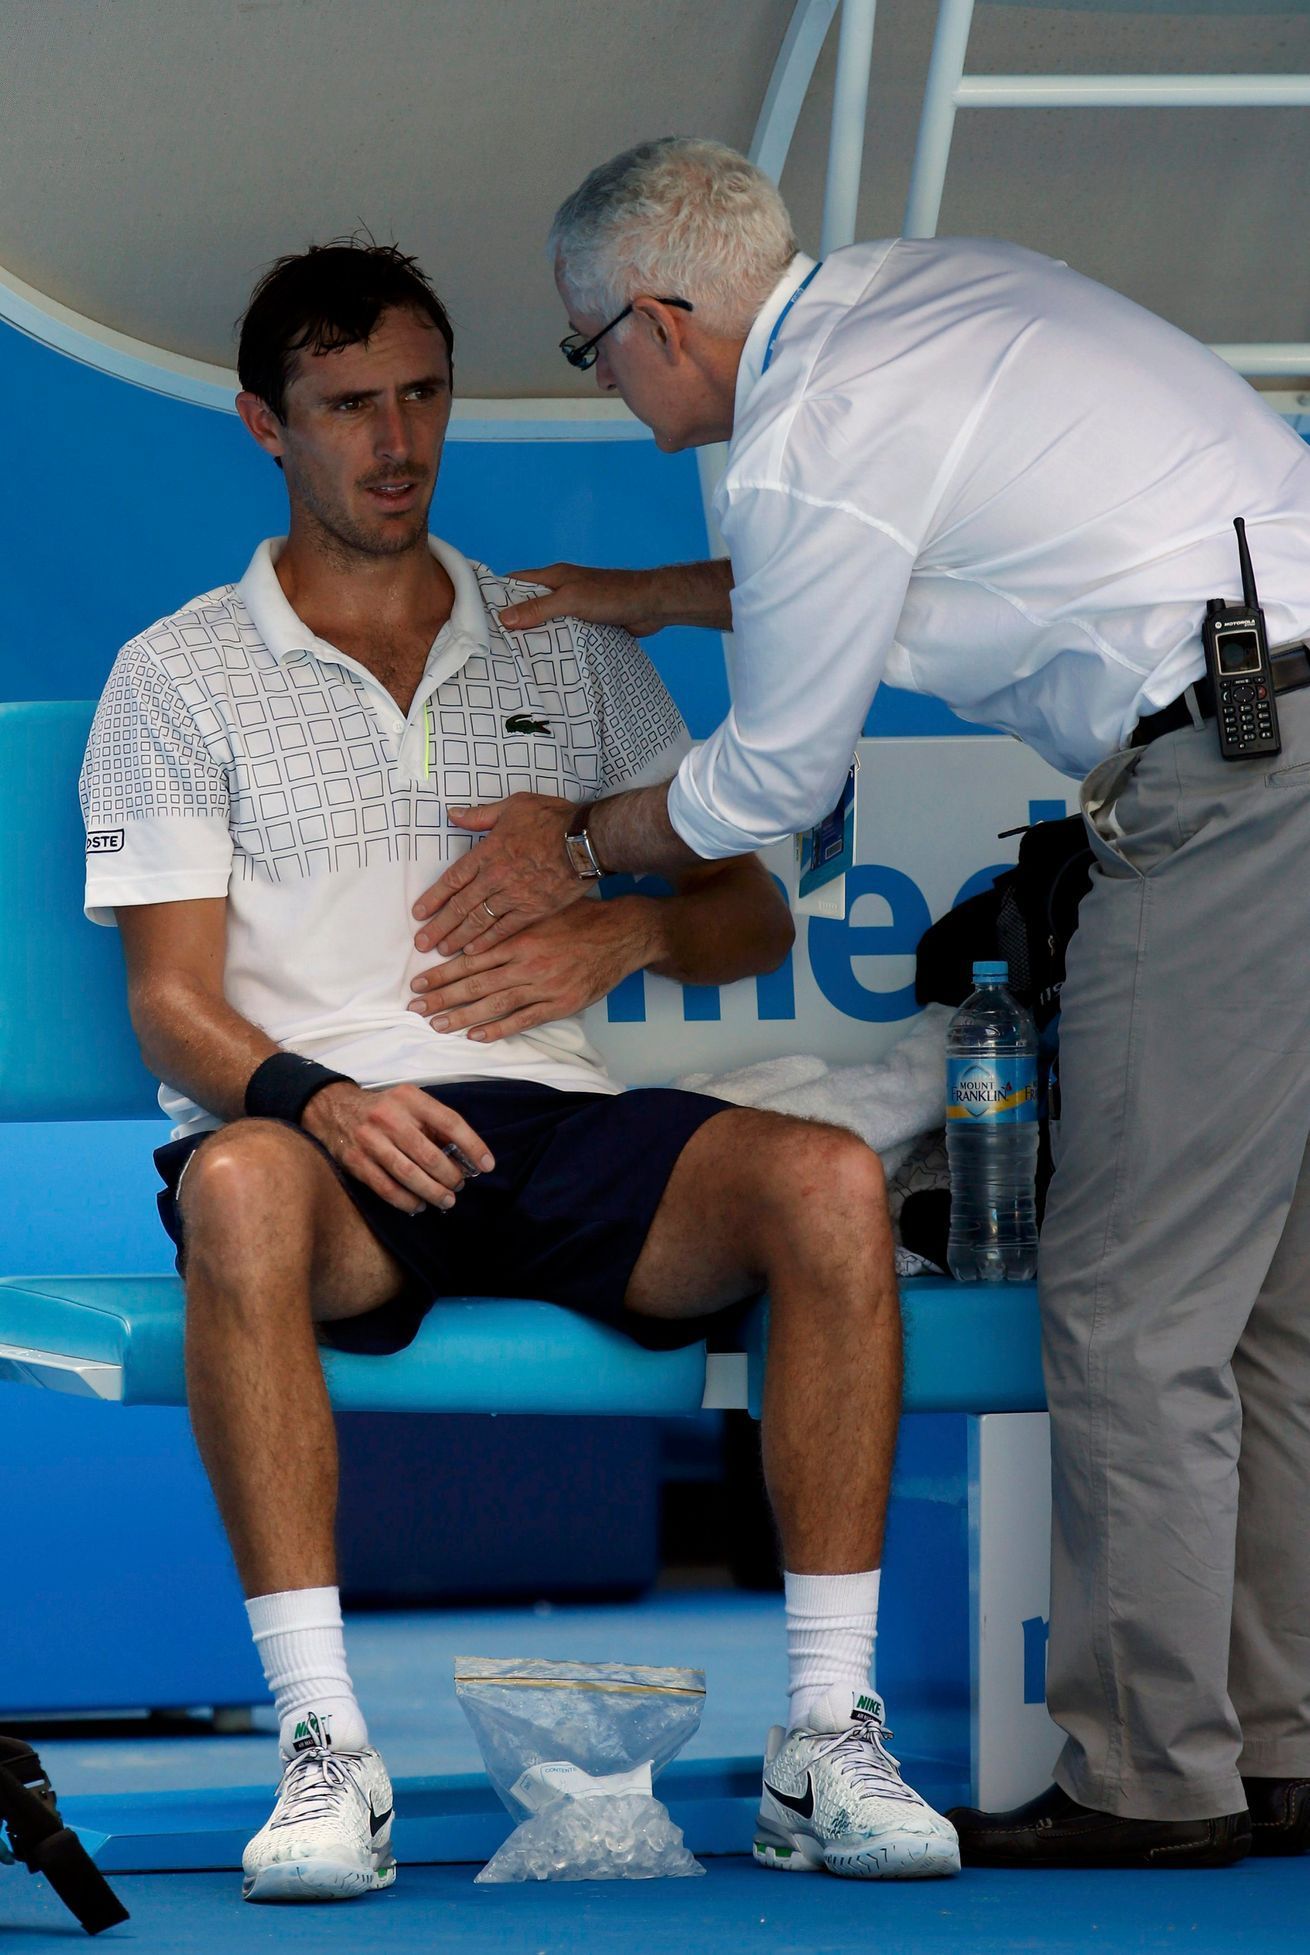 Doctor checks on Roger-Vasselin of France during a medical timeout in play in his men's singles match against Anderson of South Africa at Australian Open 2014 tennis tournament in Melbourne